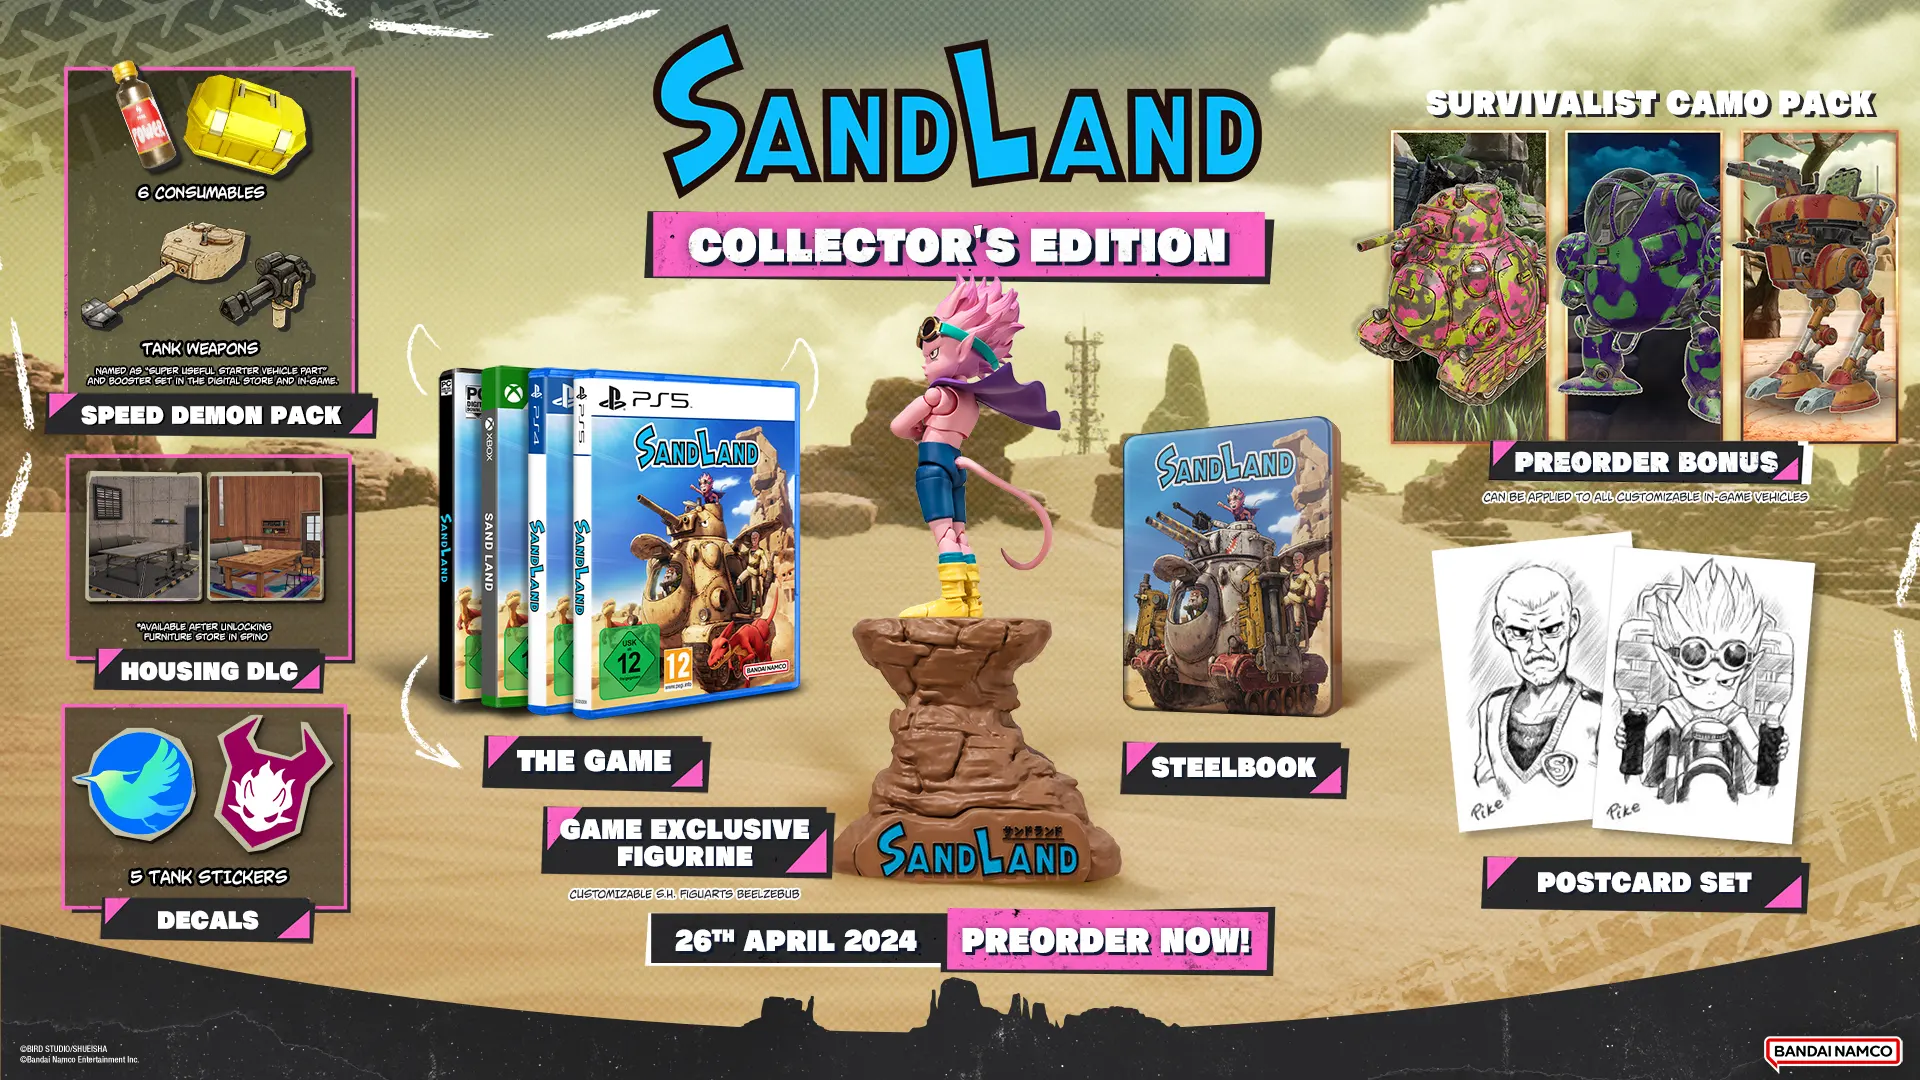 SAND LAND Announced for Xbox Series X/S, Xbox One, PS4, PS5, and PC